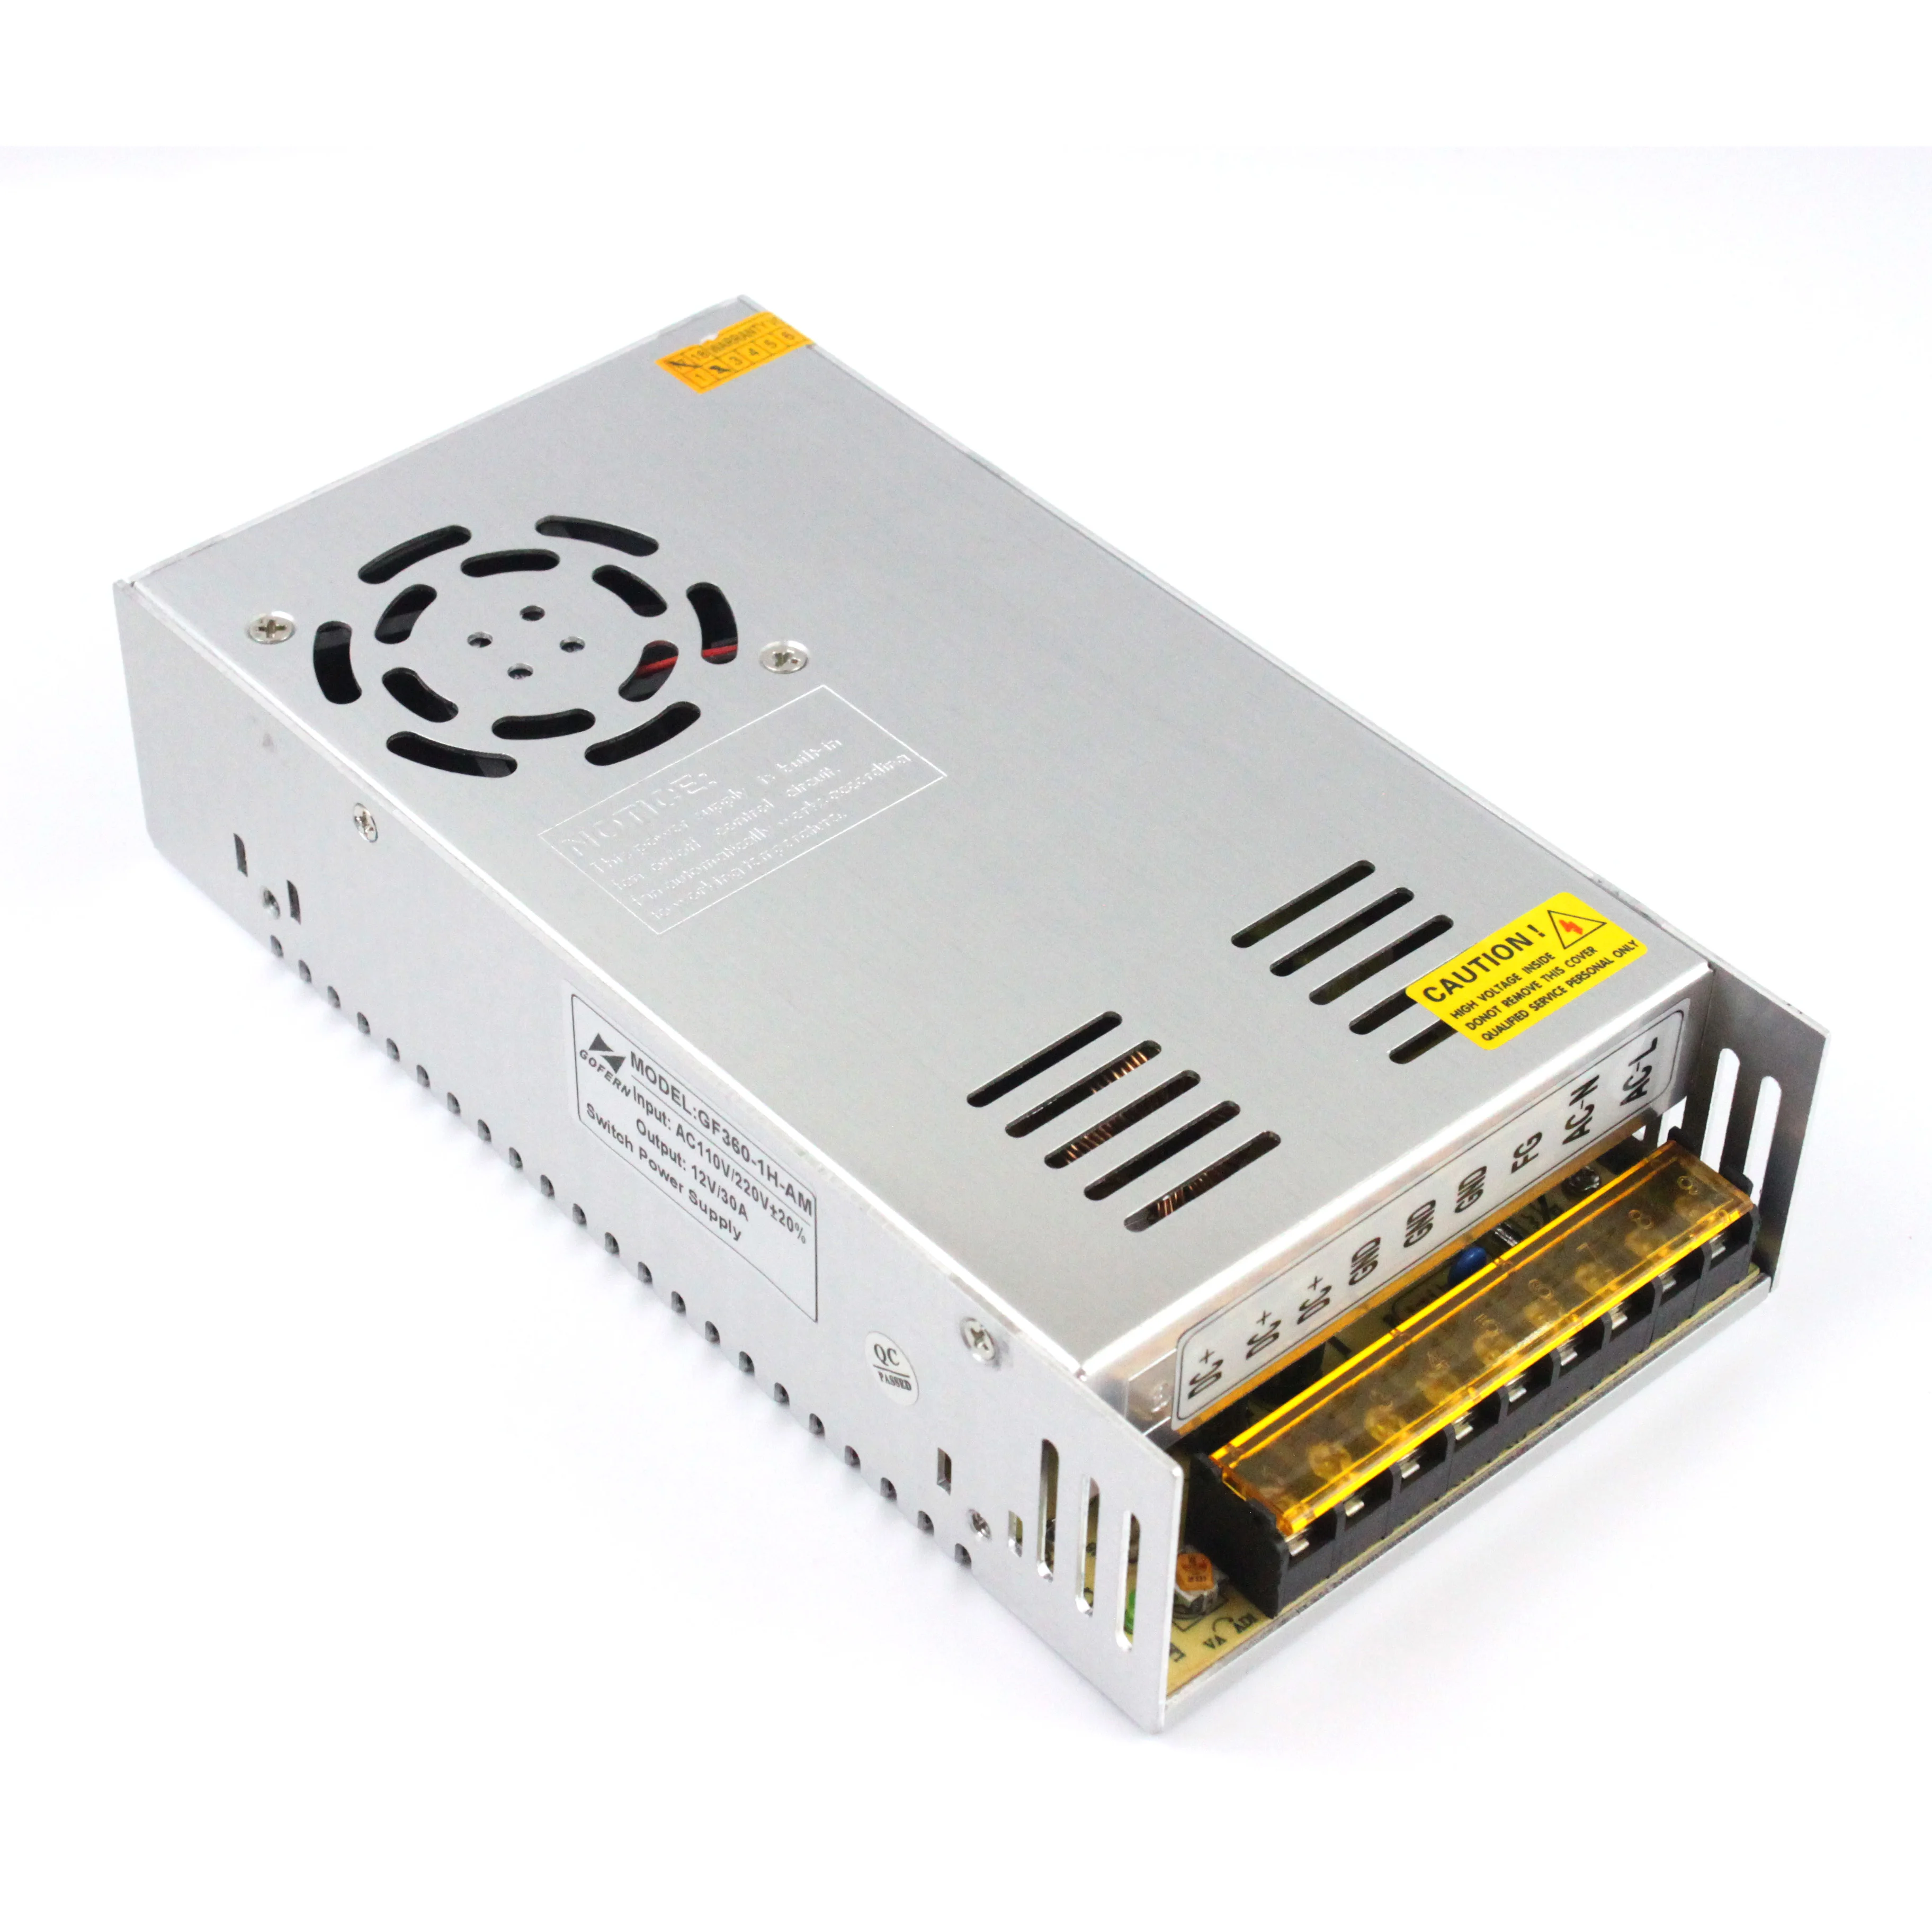 150W 24V 6.5A Rainproof outdoor Single Output Switching power supply smpsfor LED